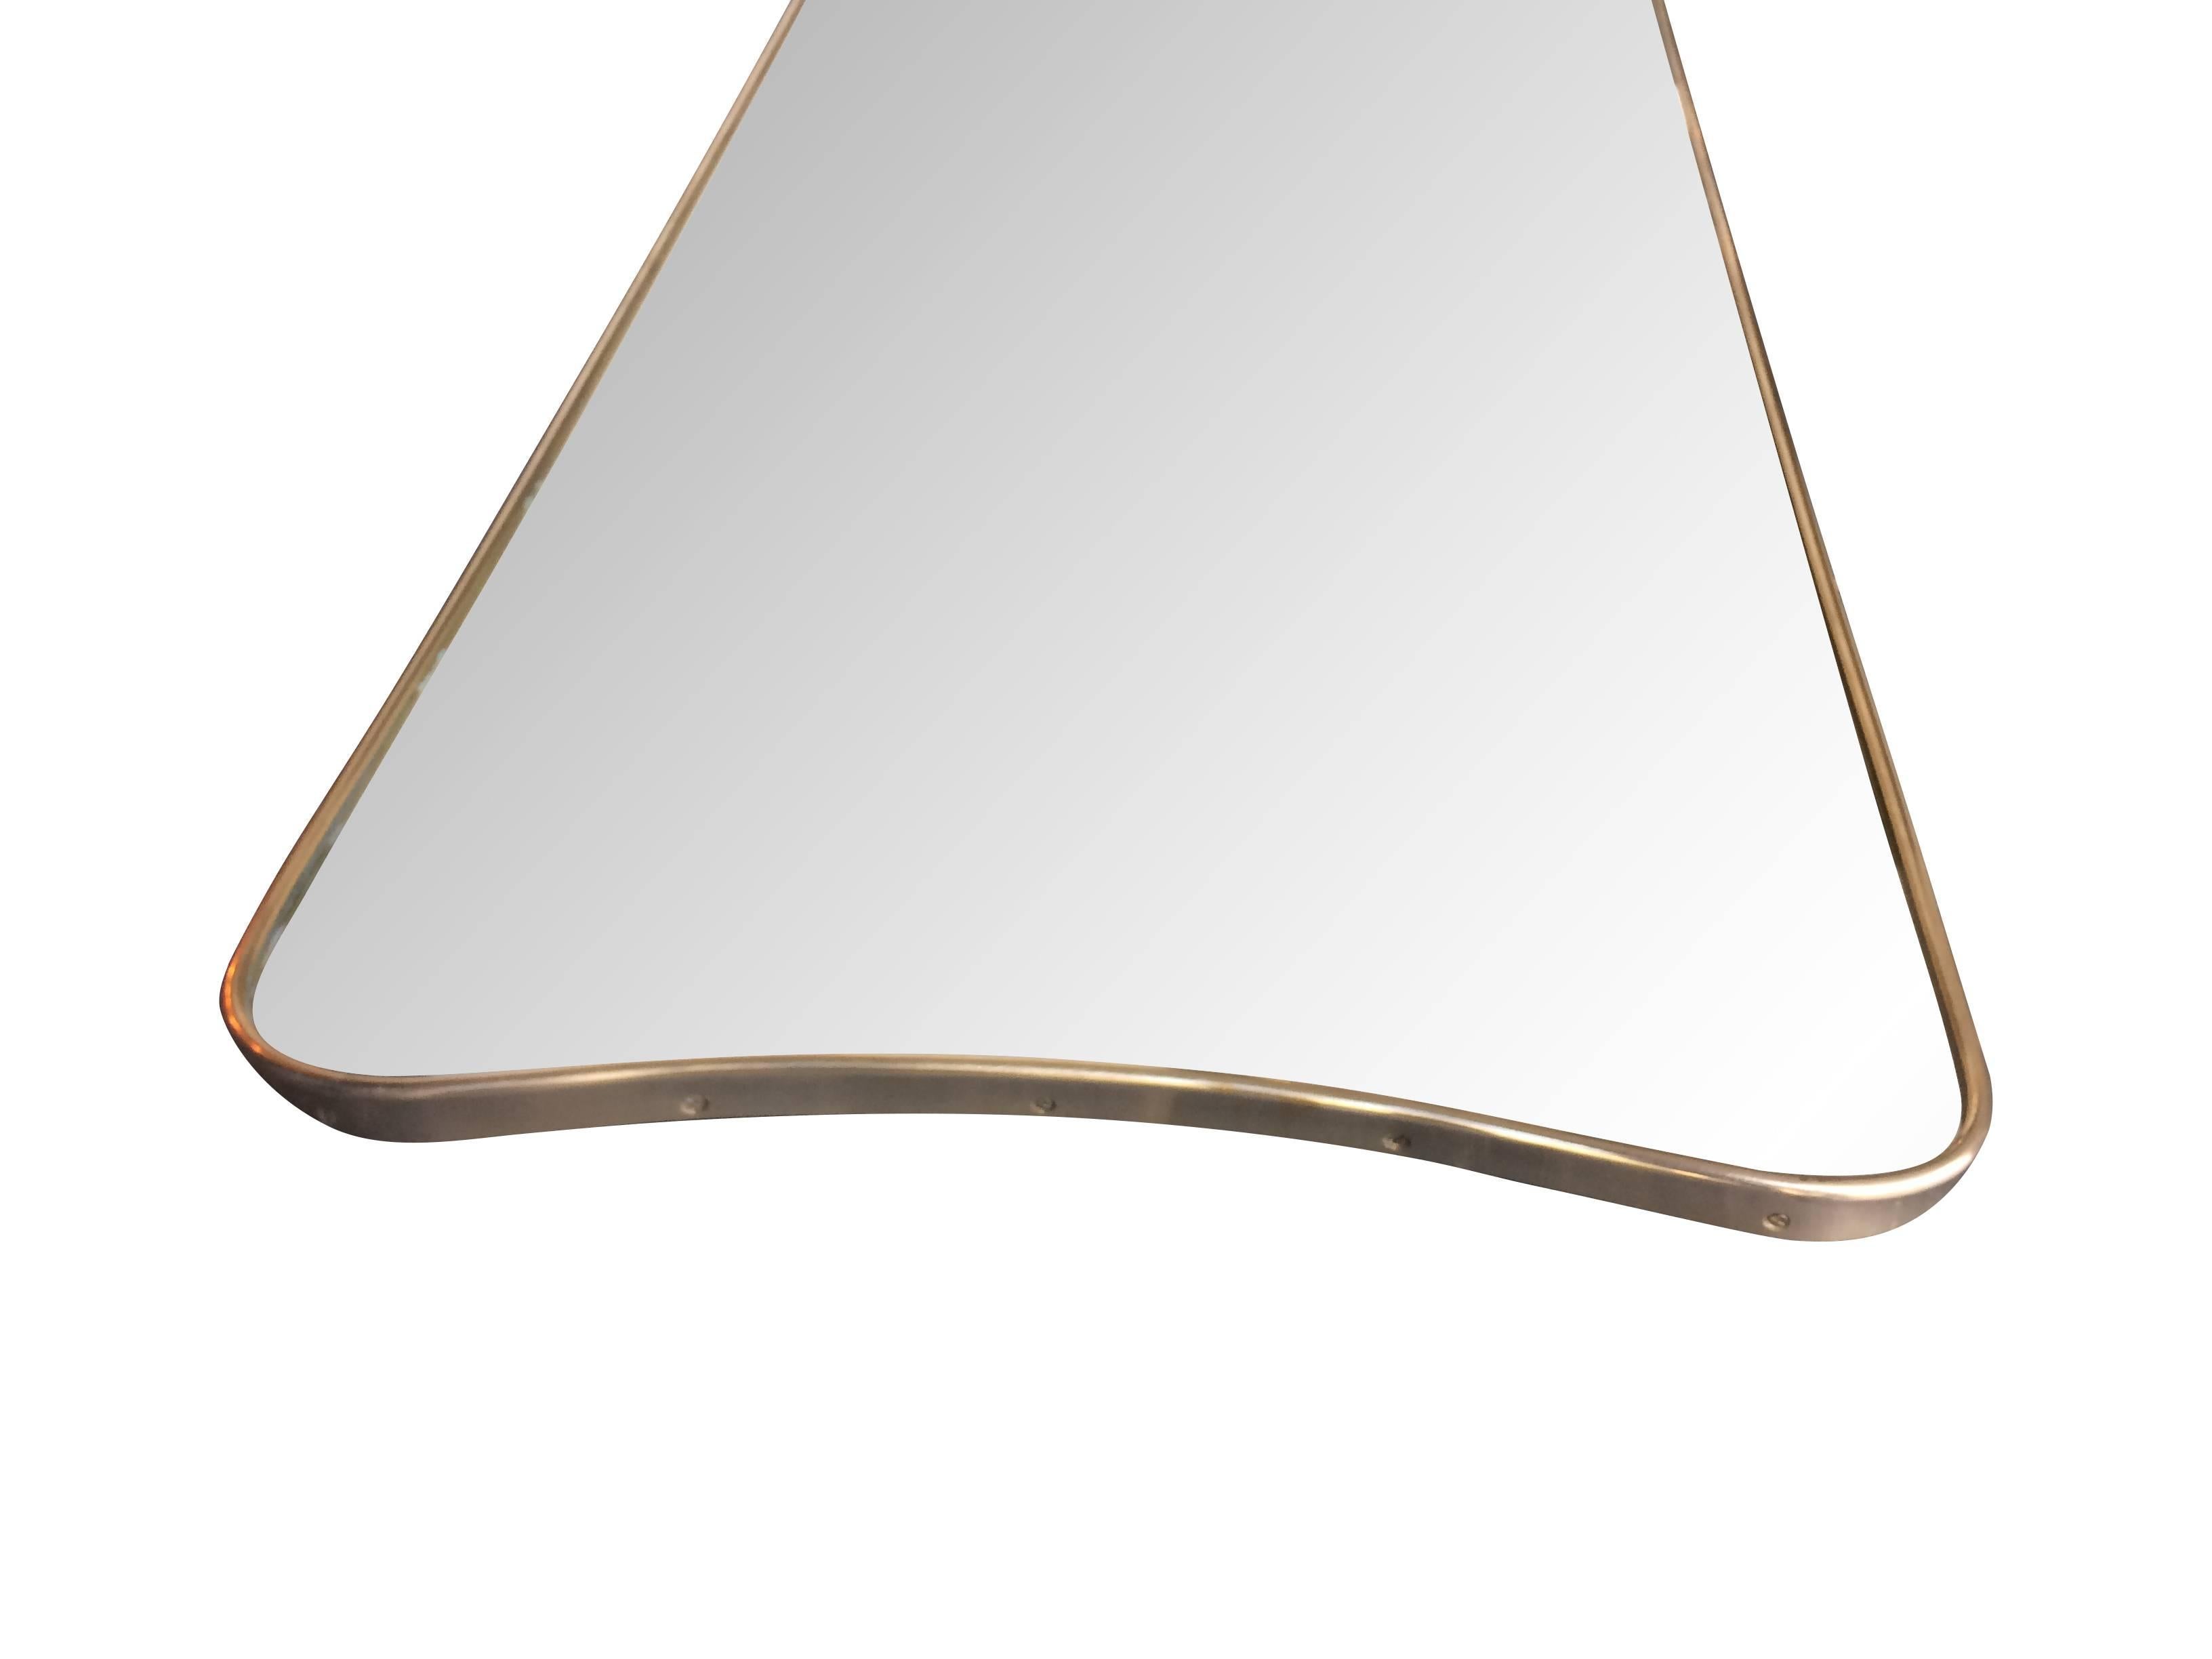 Contemporary Large Italian Shield Mirror With Brass Surround In The Style Of Gio Ponti